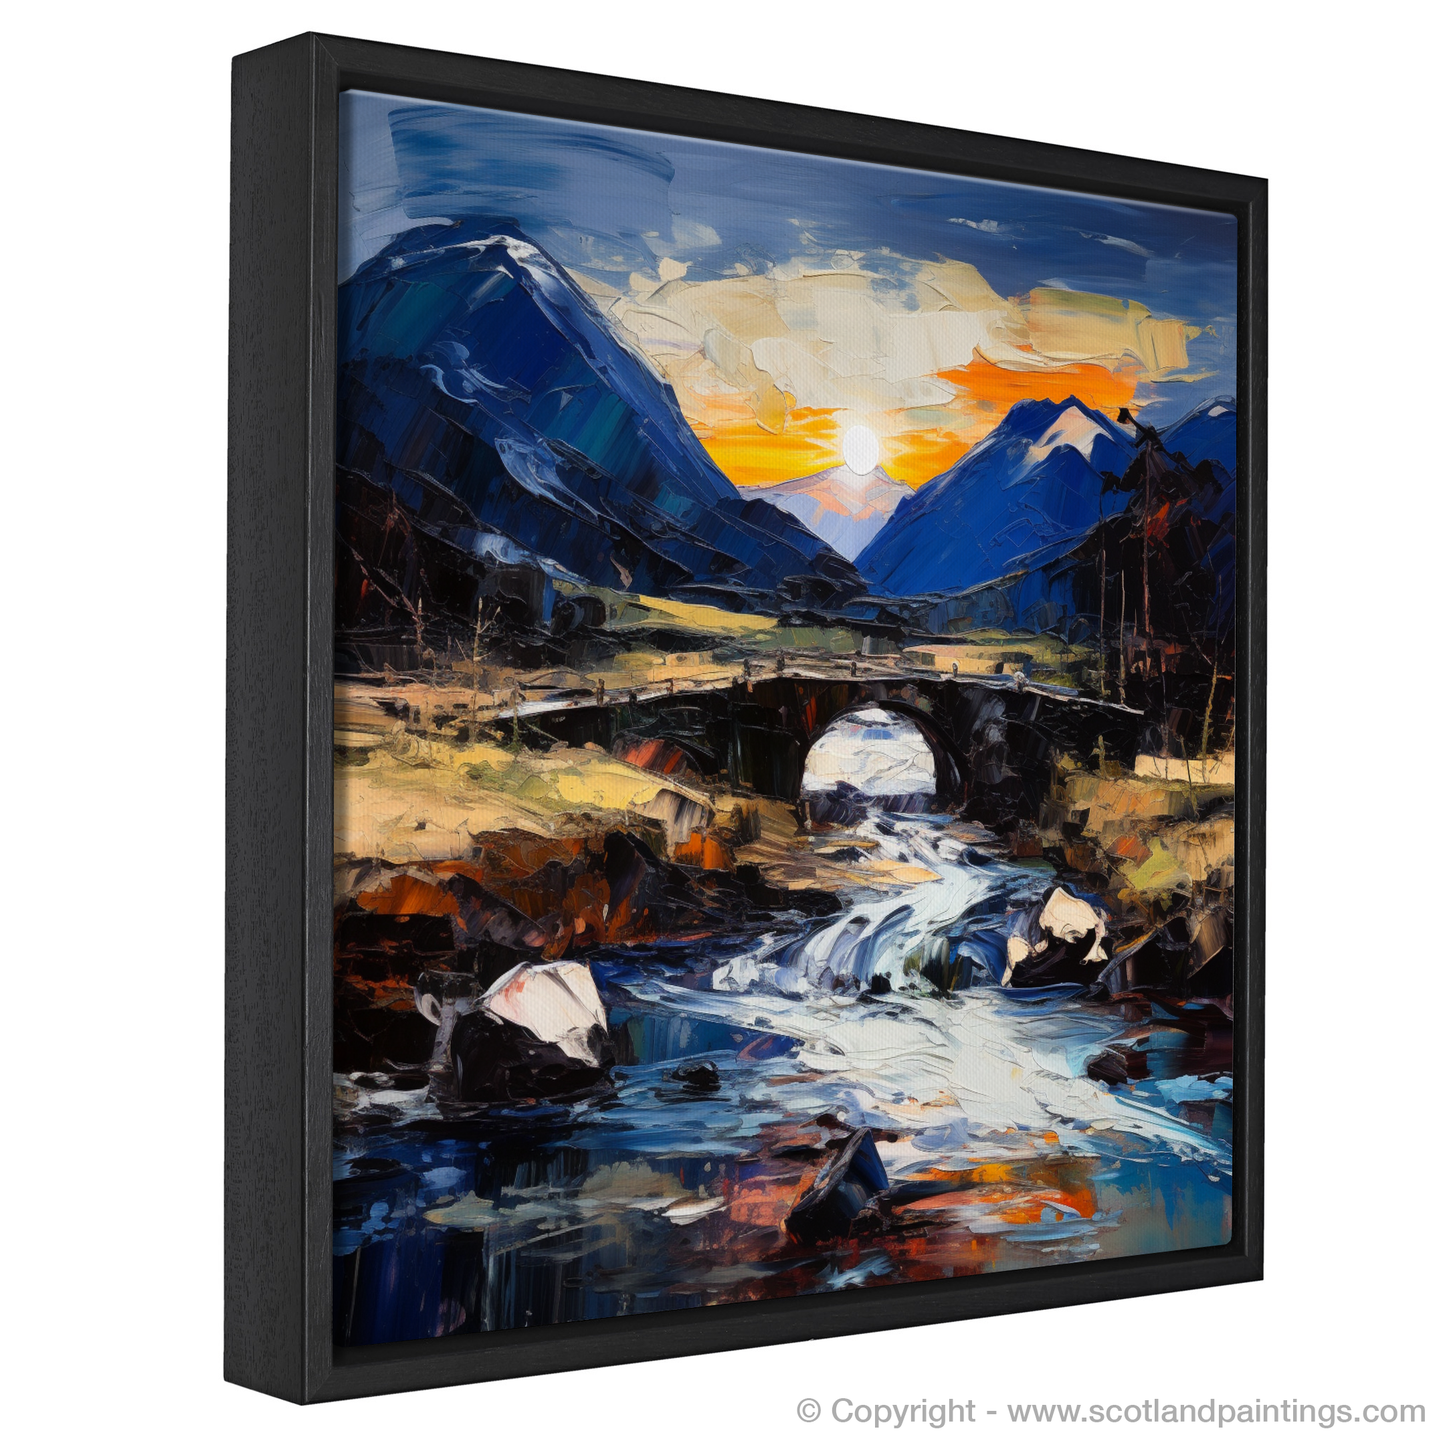 Painting and Art Print of Rustic bridge at twilight in Glencoe entitled "Twilight Serenity at Rustic Bridge in Glencoe".